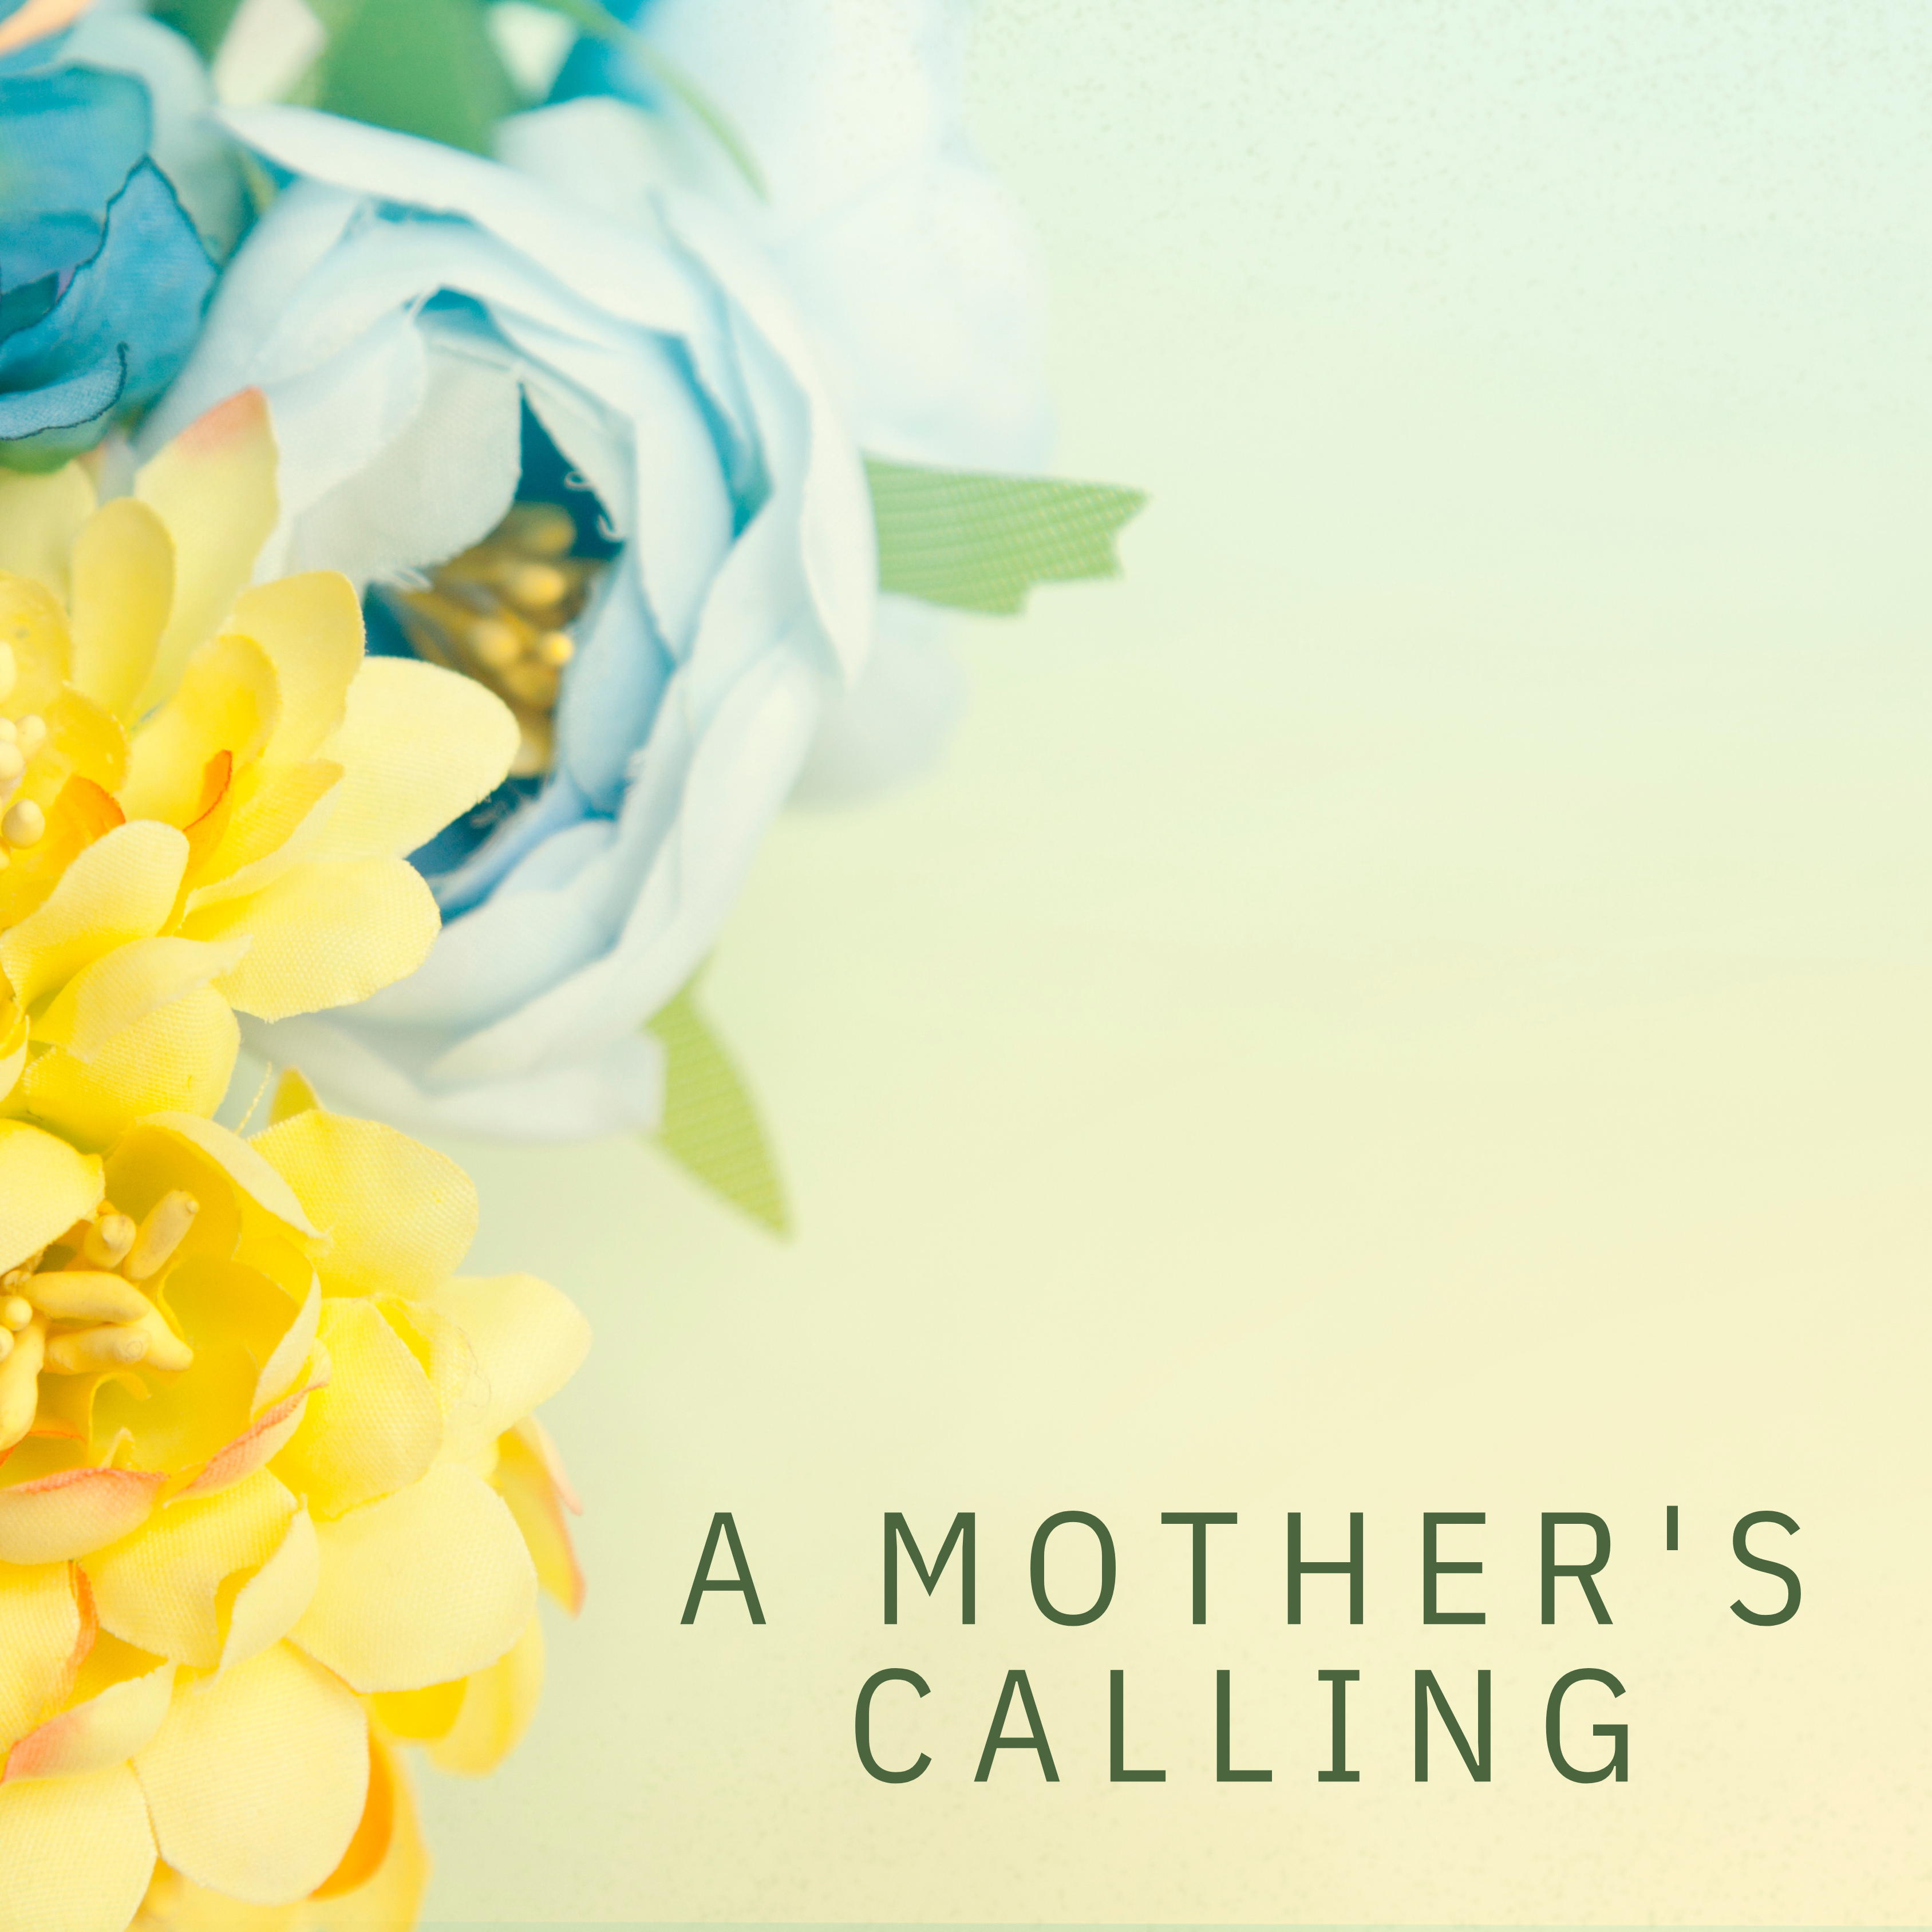 A Mother’s Calling